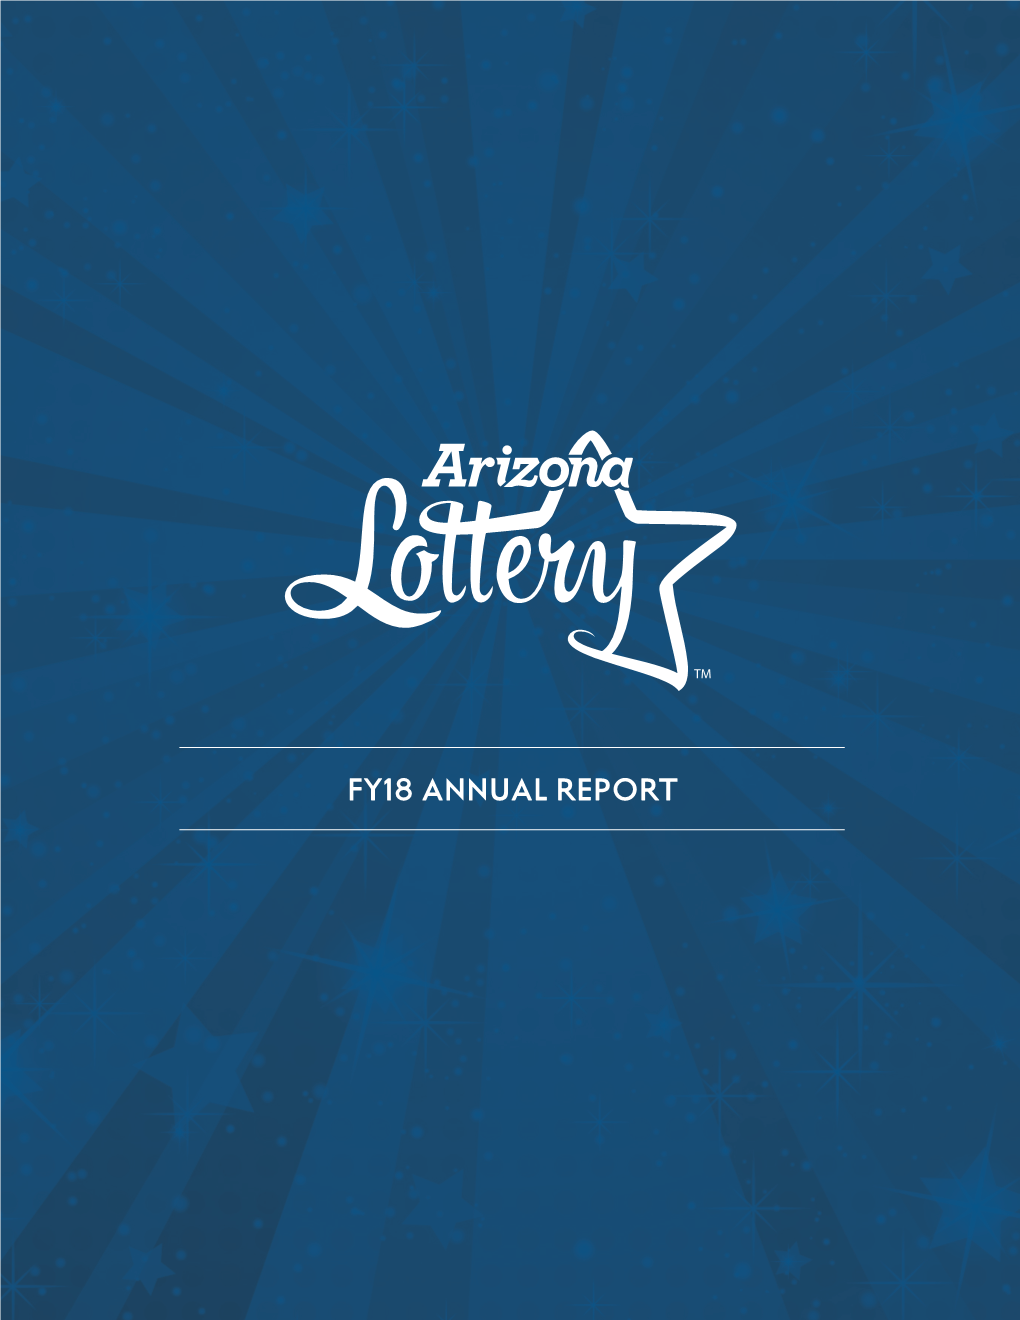 Fy18 Annual Report